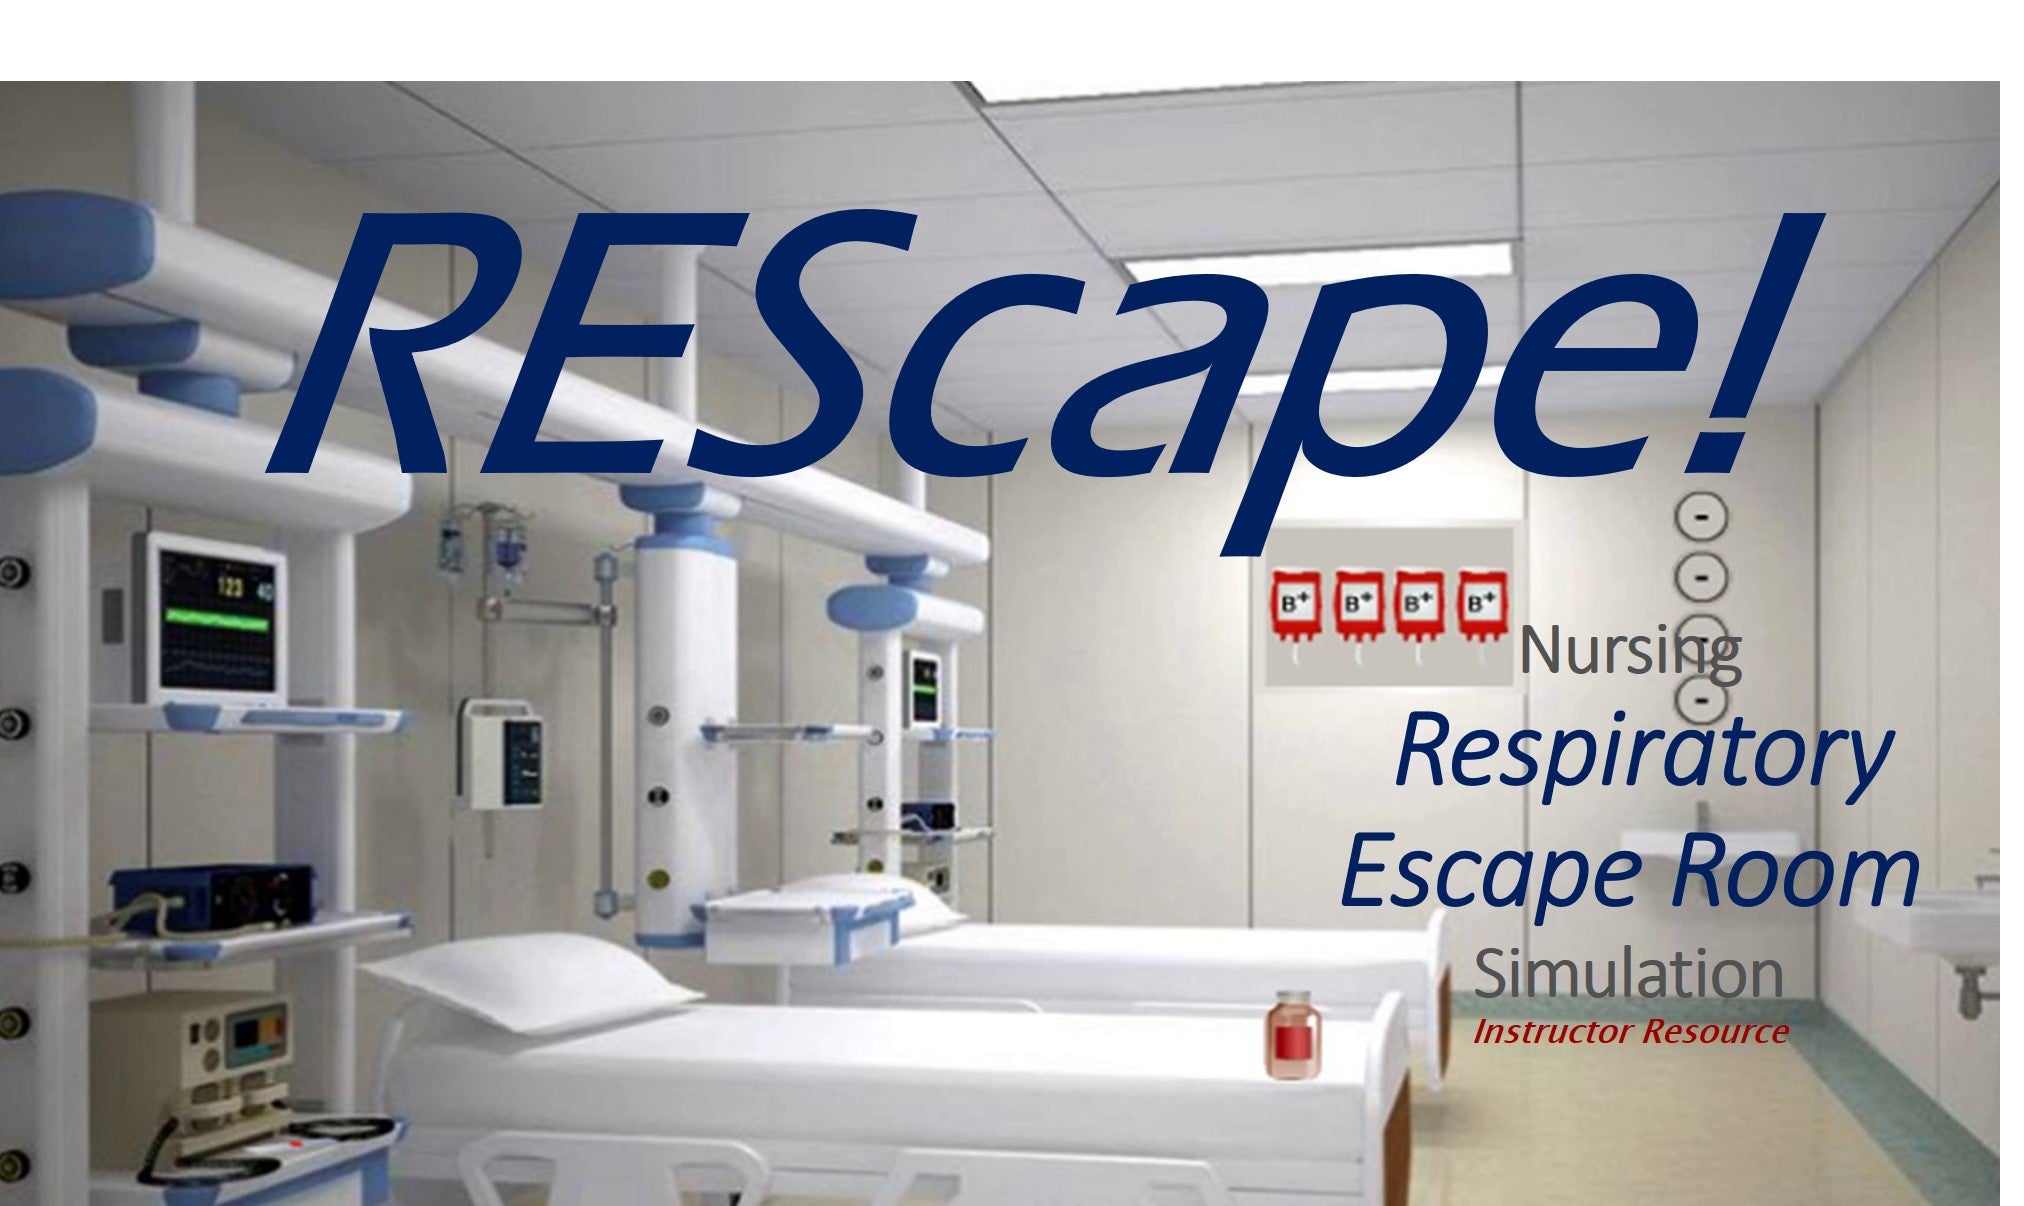 Escape Room: REScape™ - Nursing Respiratory - COPD with Bacterial Infection